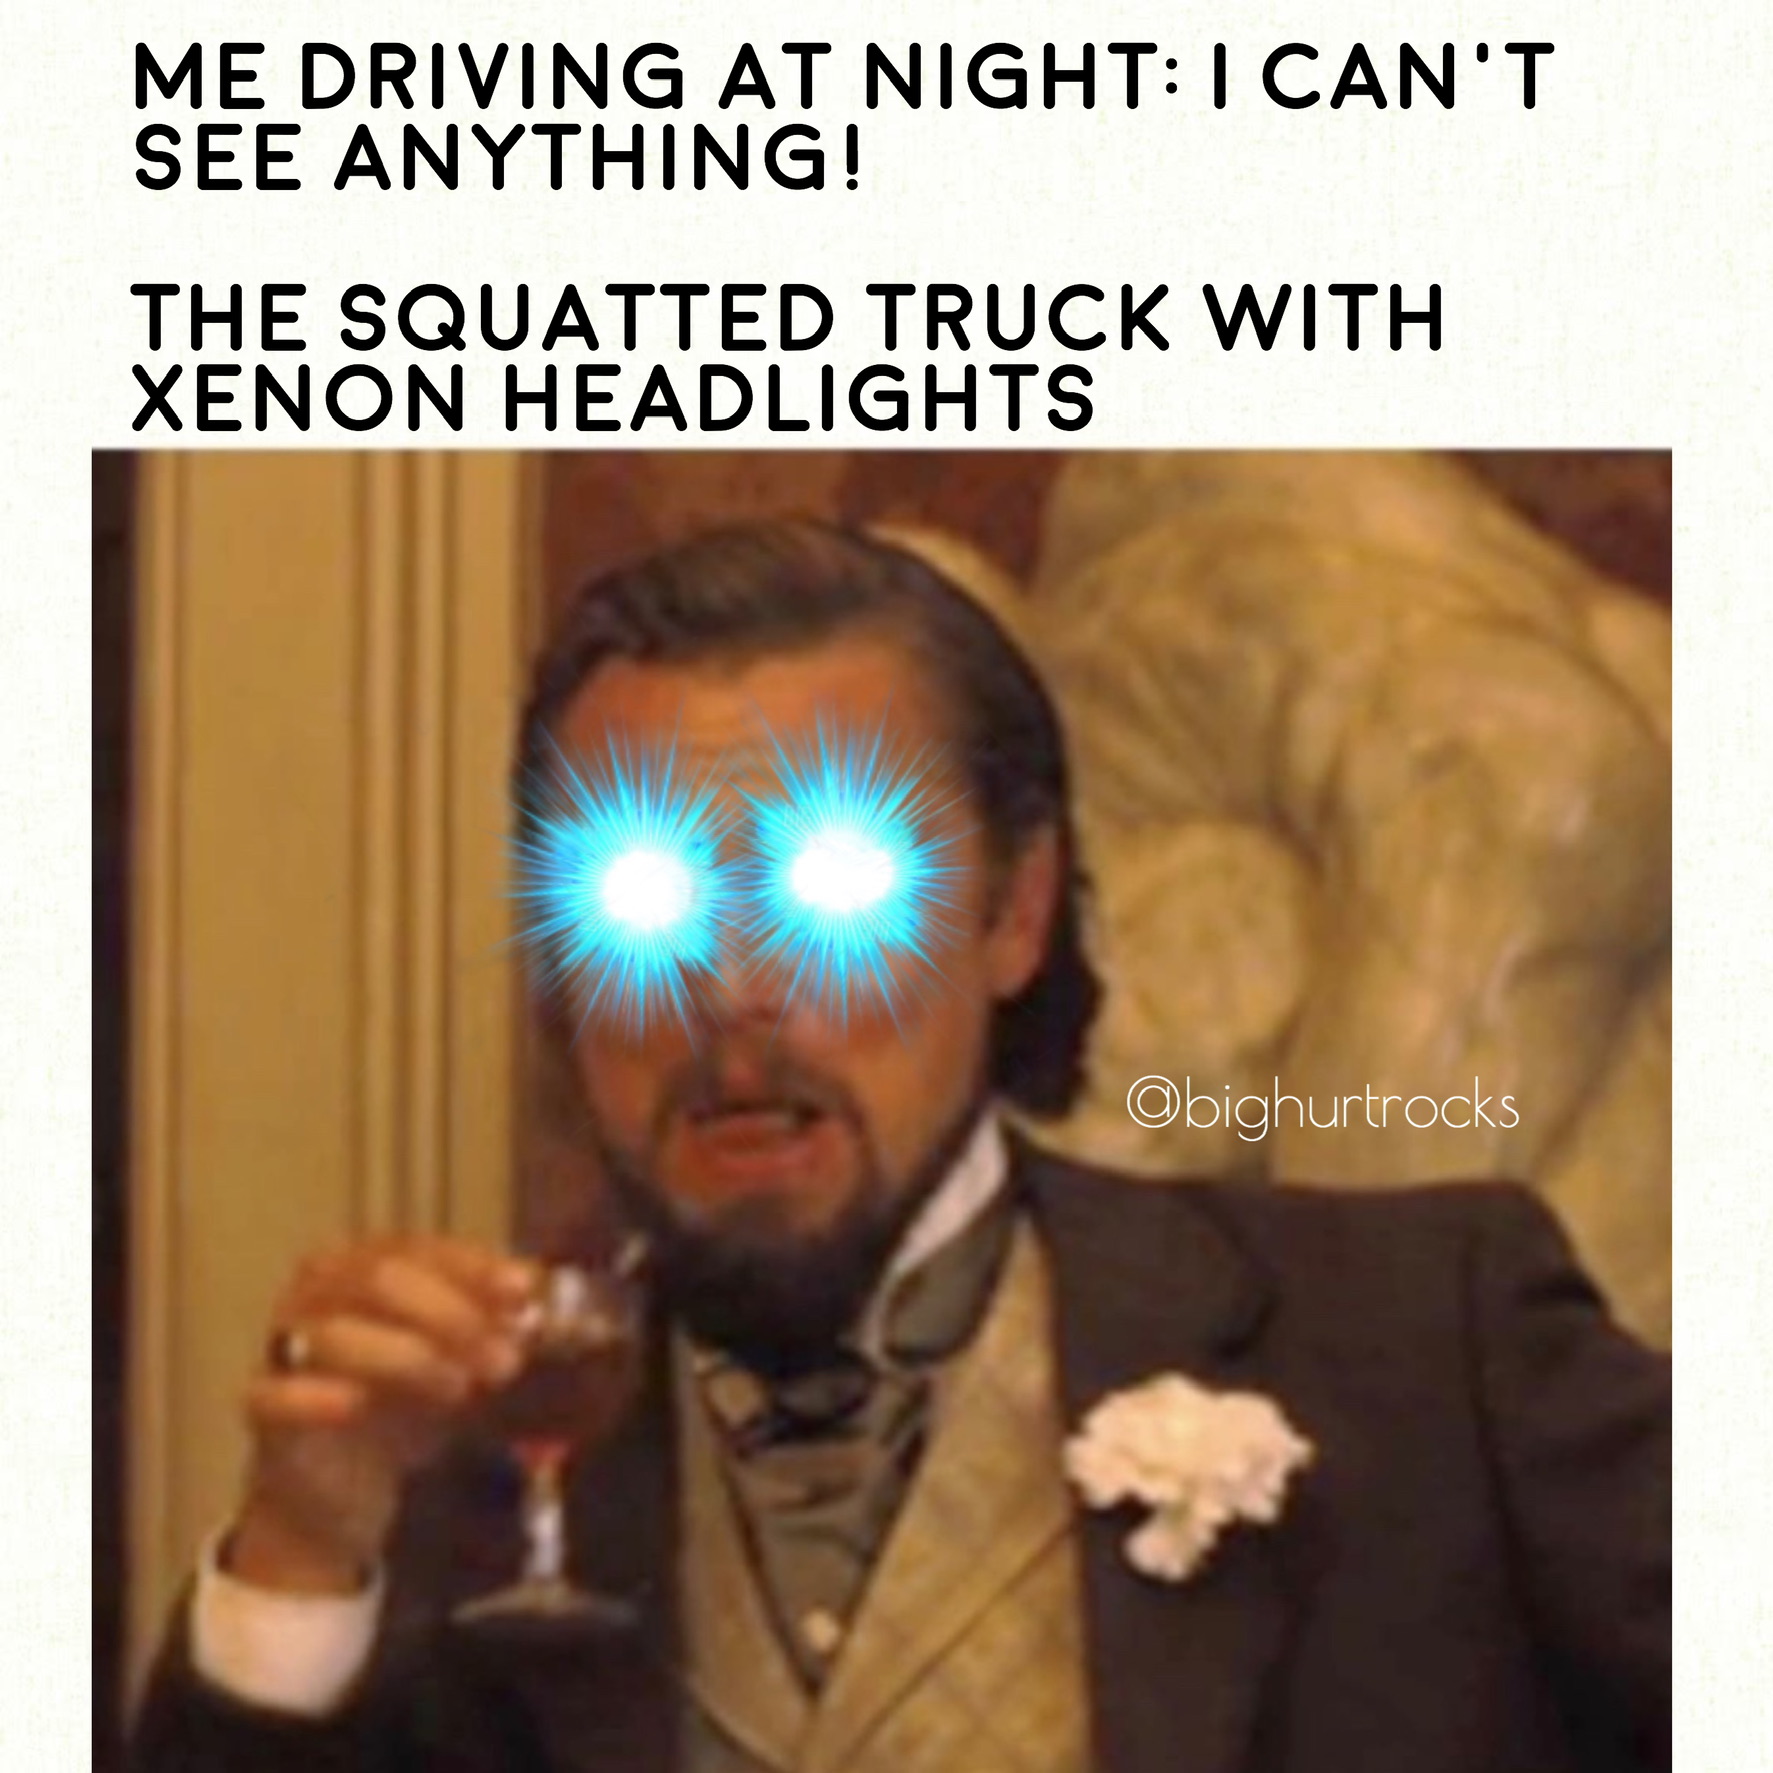 bighurtrocks- meme leonardo dicaprio - Me Driving At Night I Can'T See Anything! The Squatted Truck With Xenon Headlights